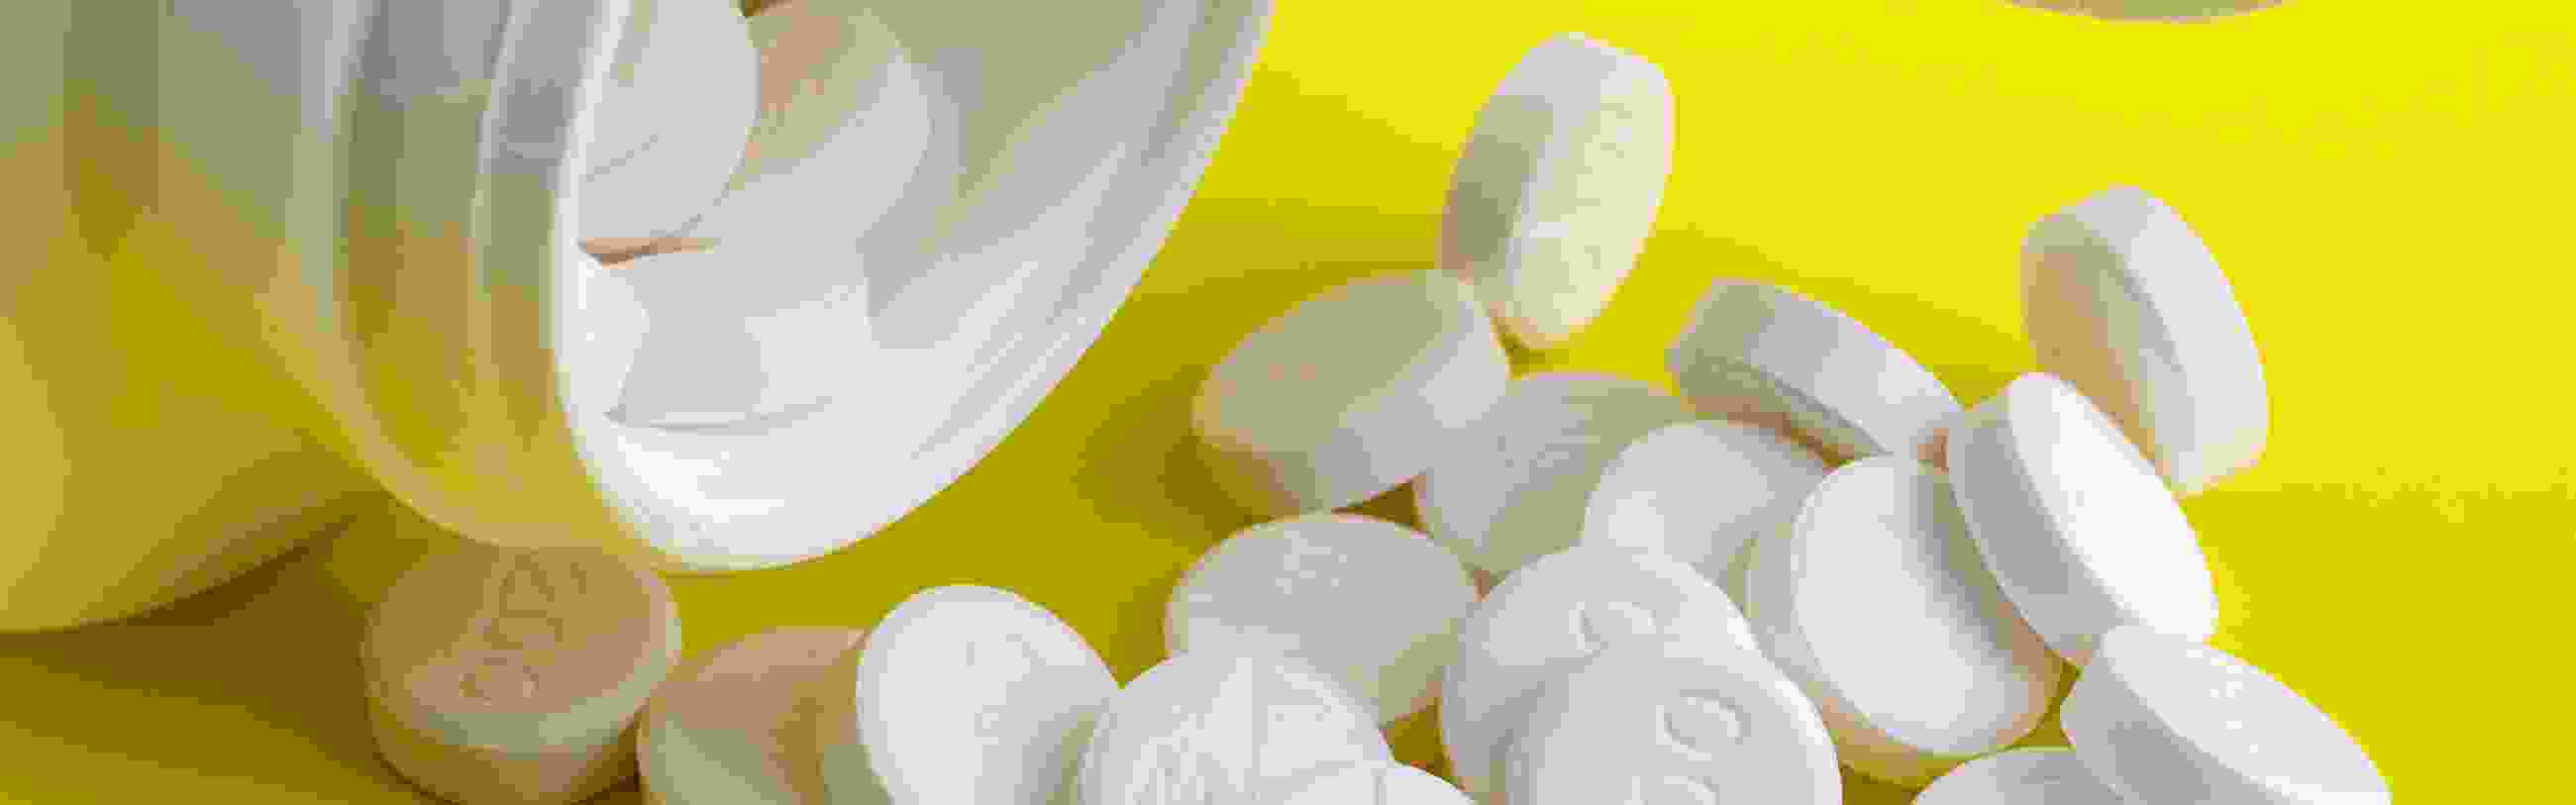 Round white pills spill out of a bottle onto a yellow background